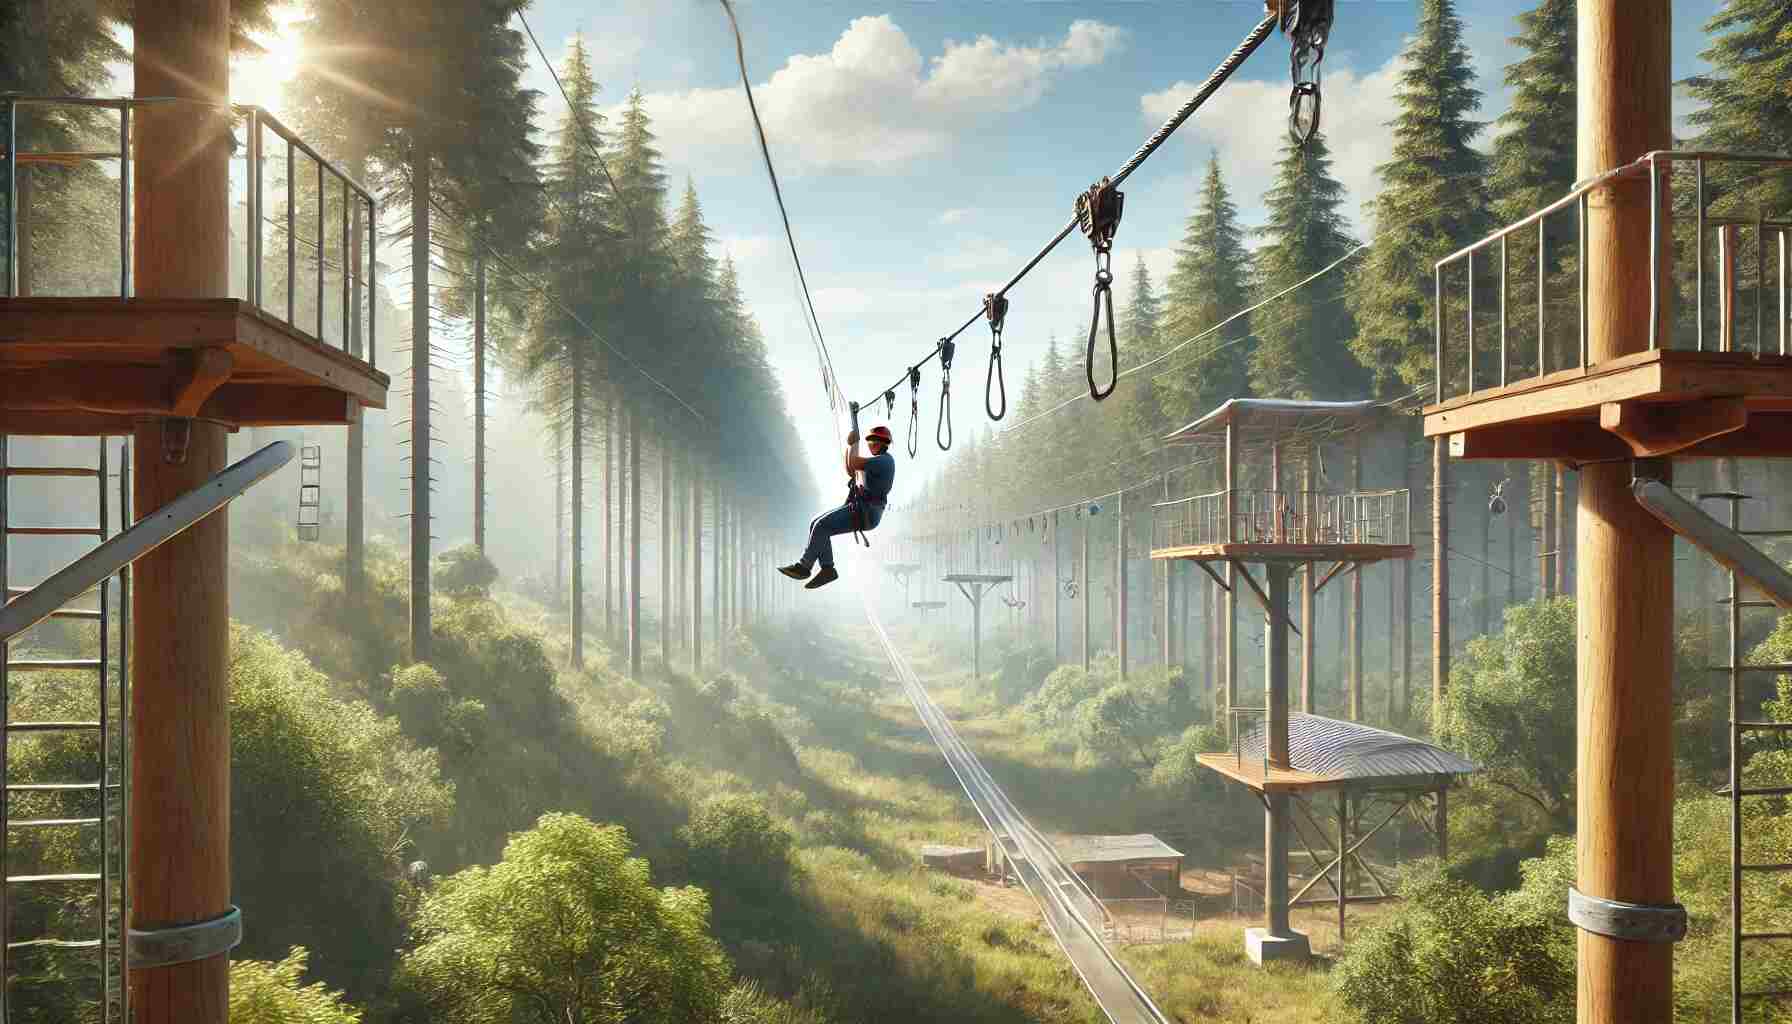 An image of a commercial zip line set up in a lush forest adventure park, featuring a rider gliding smoothly across the cable while wearing a helmet and safety harness. The background includes tall trees, a clear blue sky, and a distant platform where the zip line starts, capturing the thrill and excitement of zip lining.